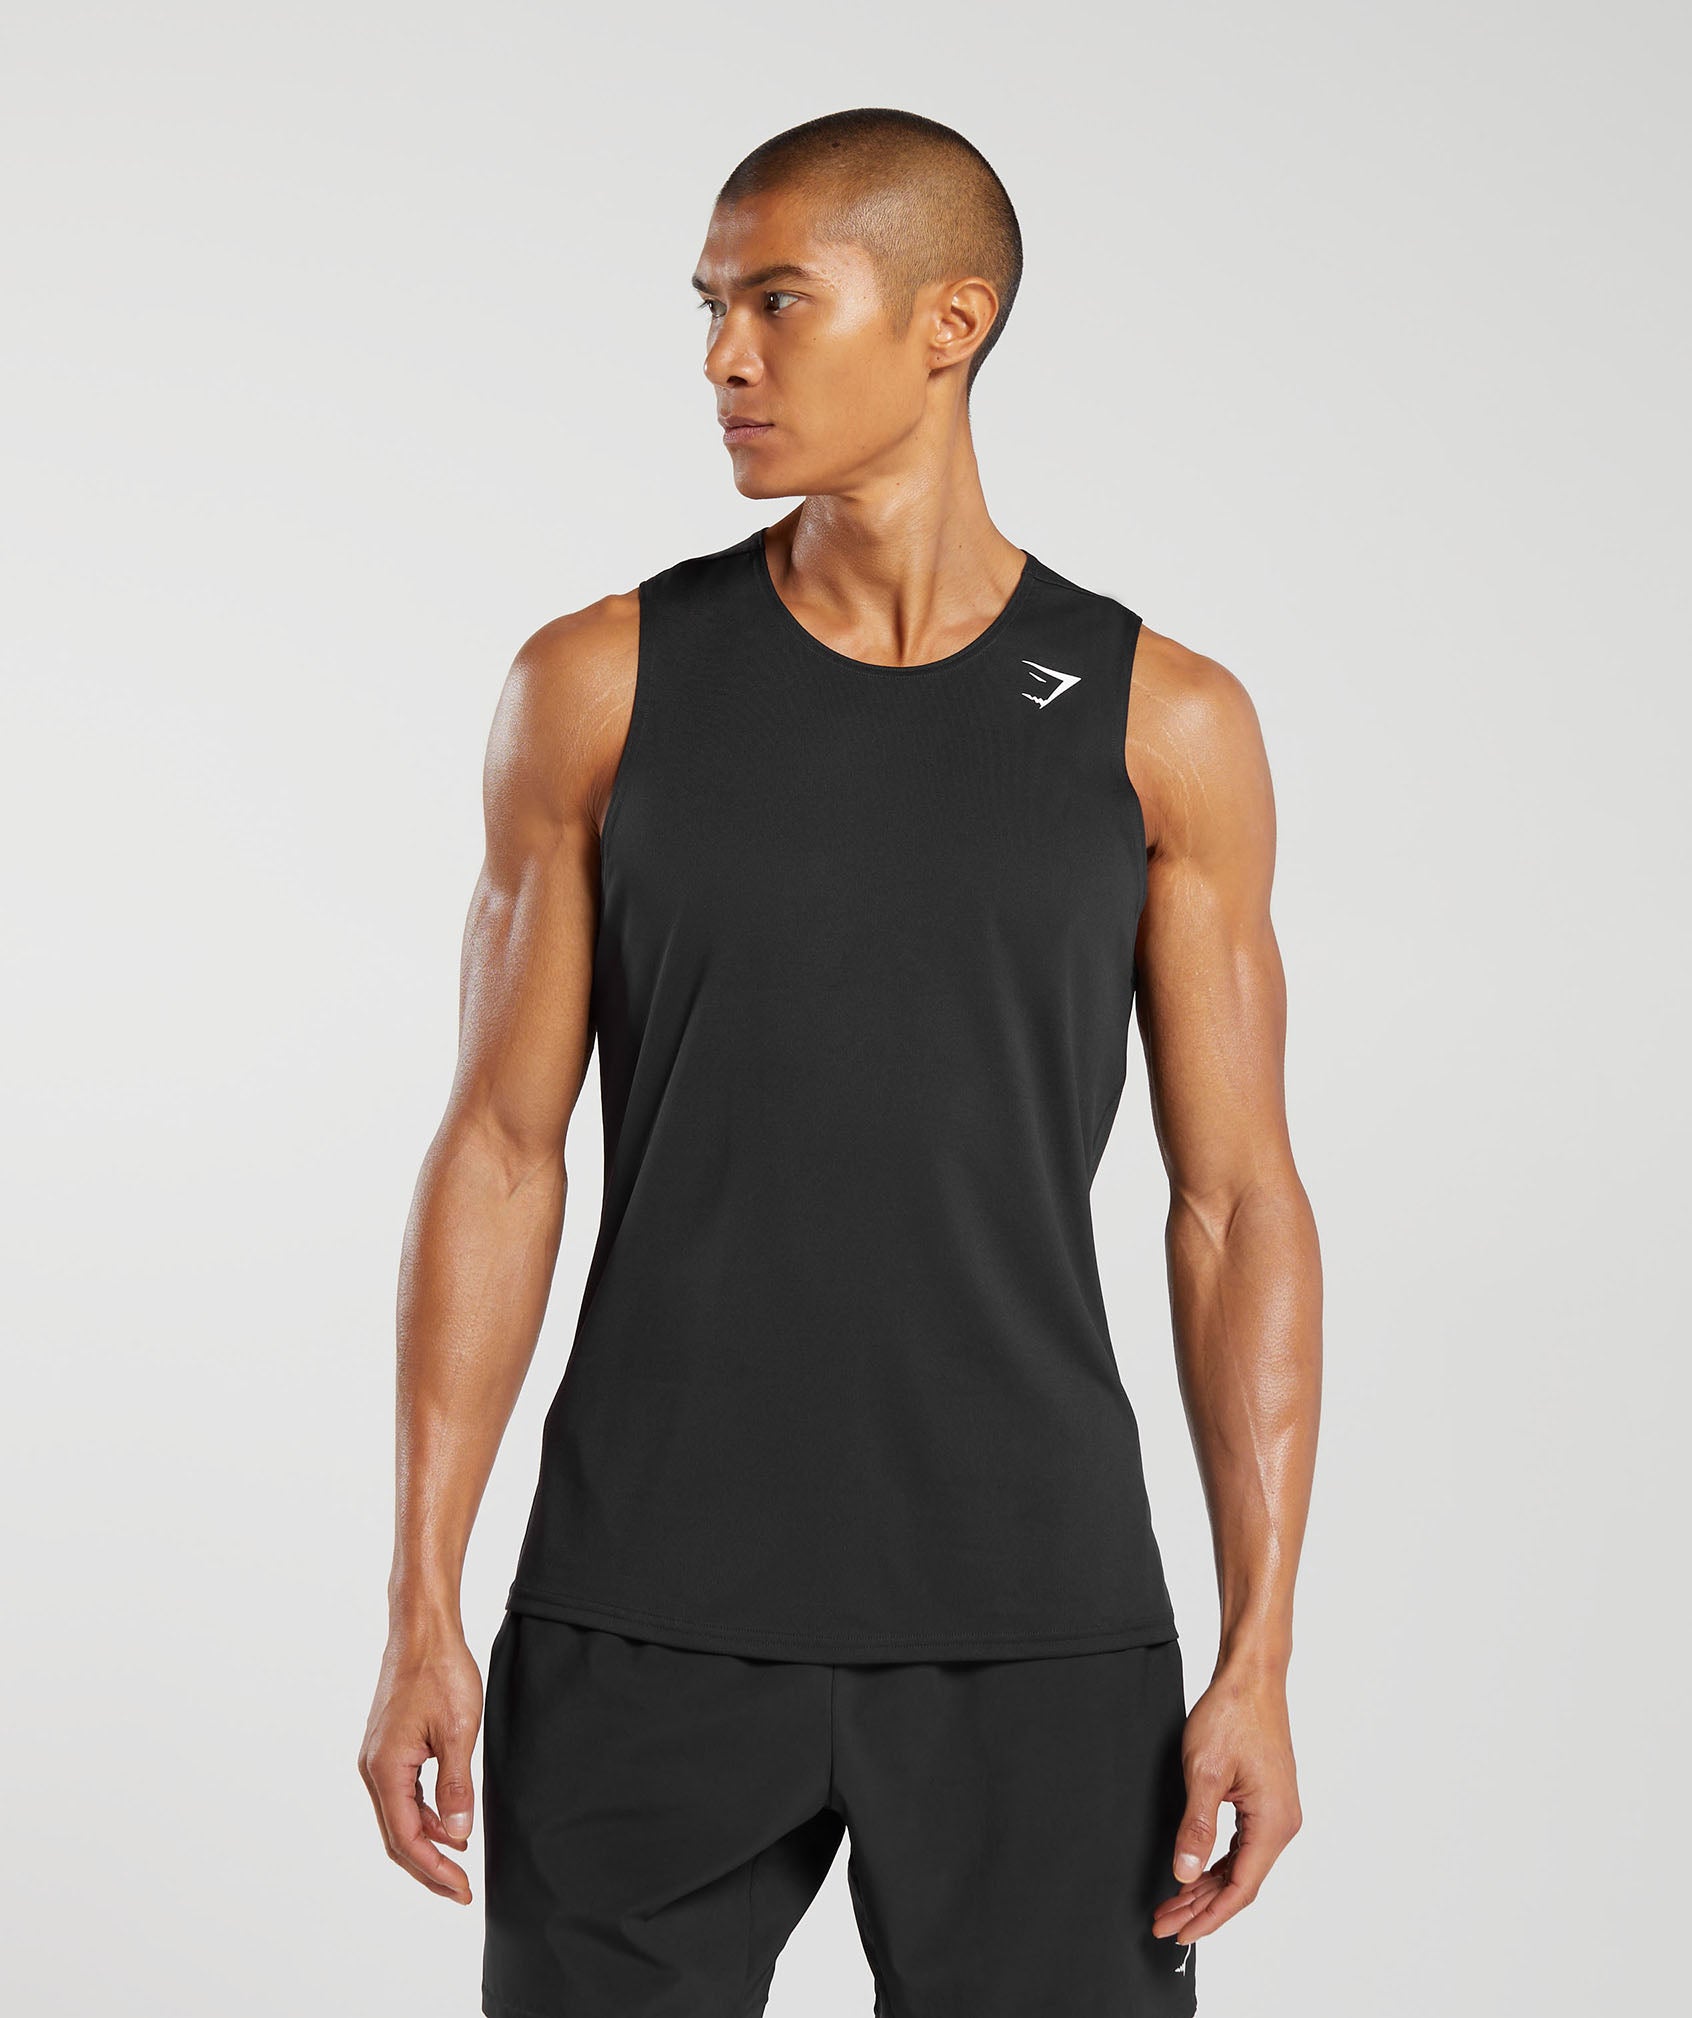 Arrival Tank in Black is out of stock